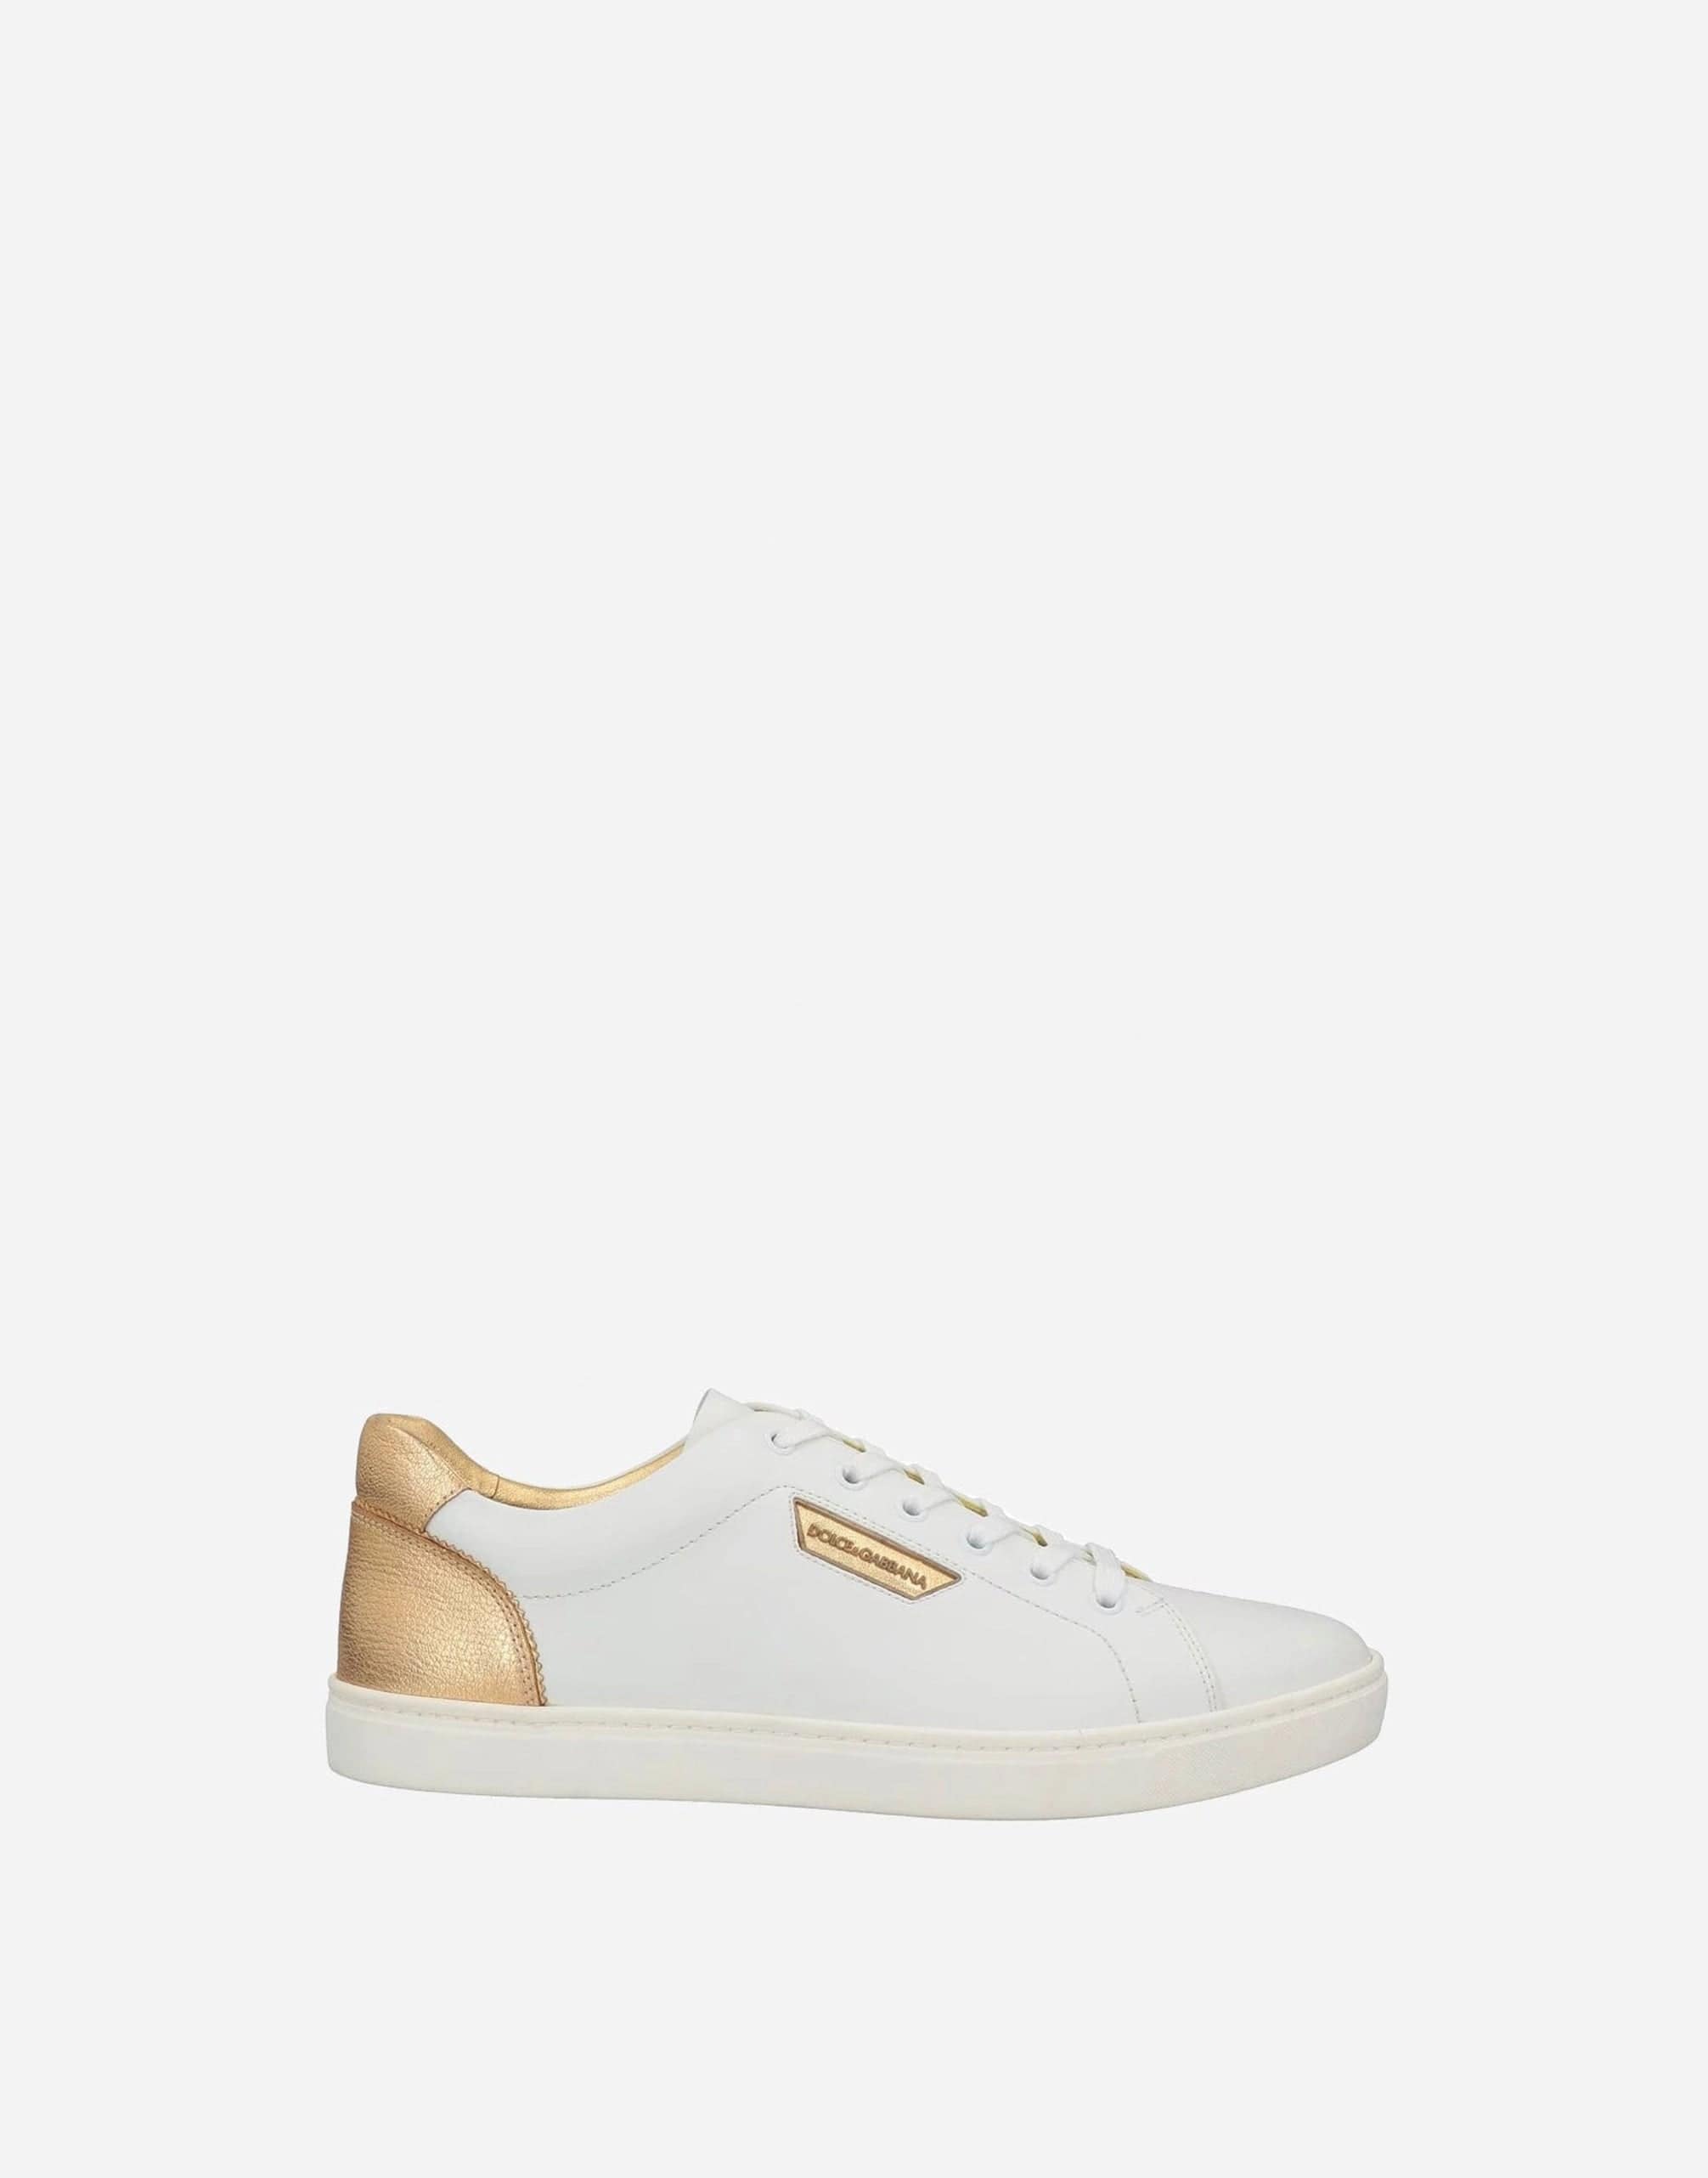 Dolce & Gabbana Signature Leather Logo Sneakers